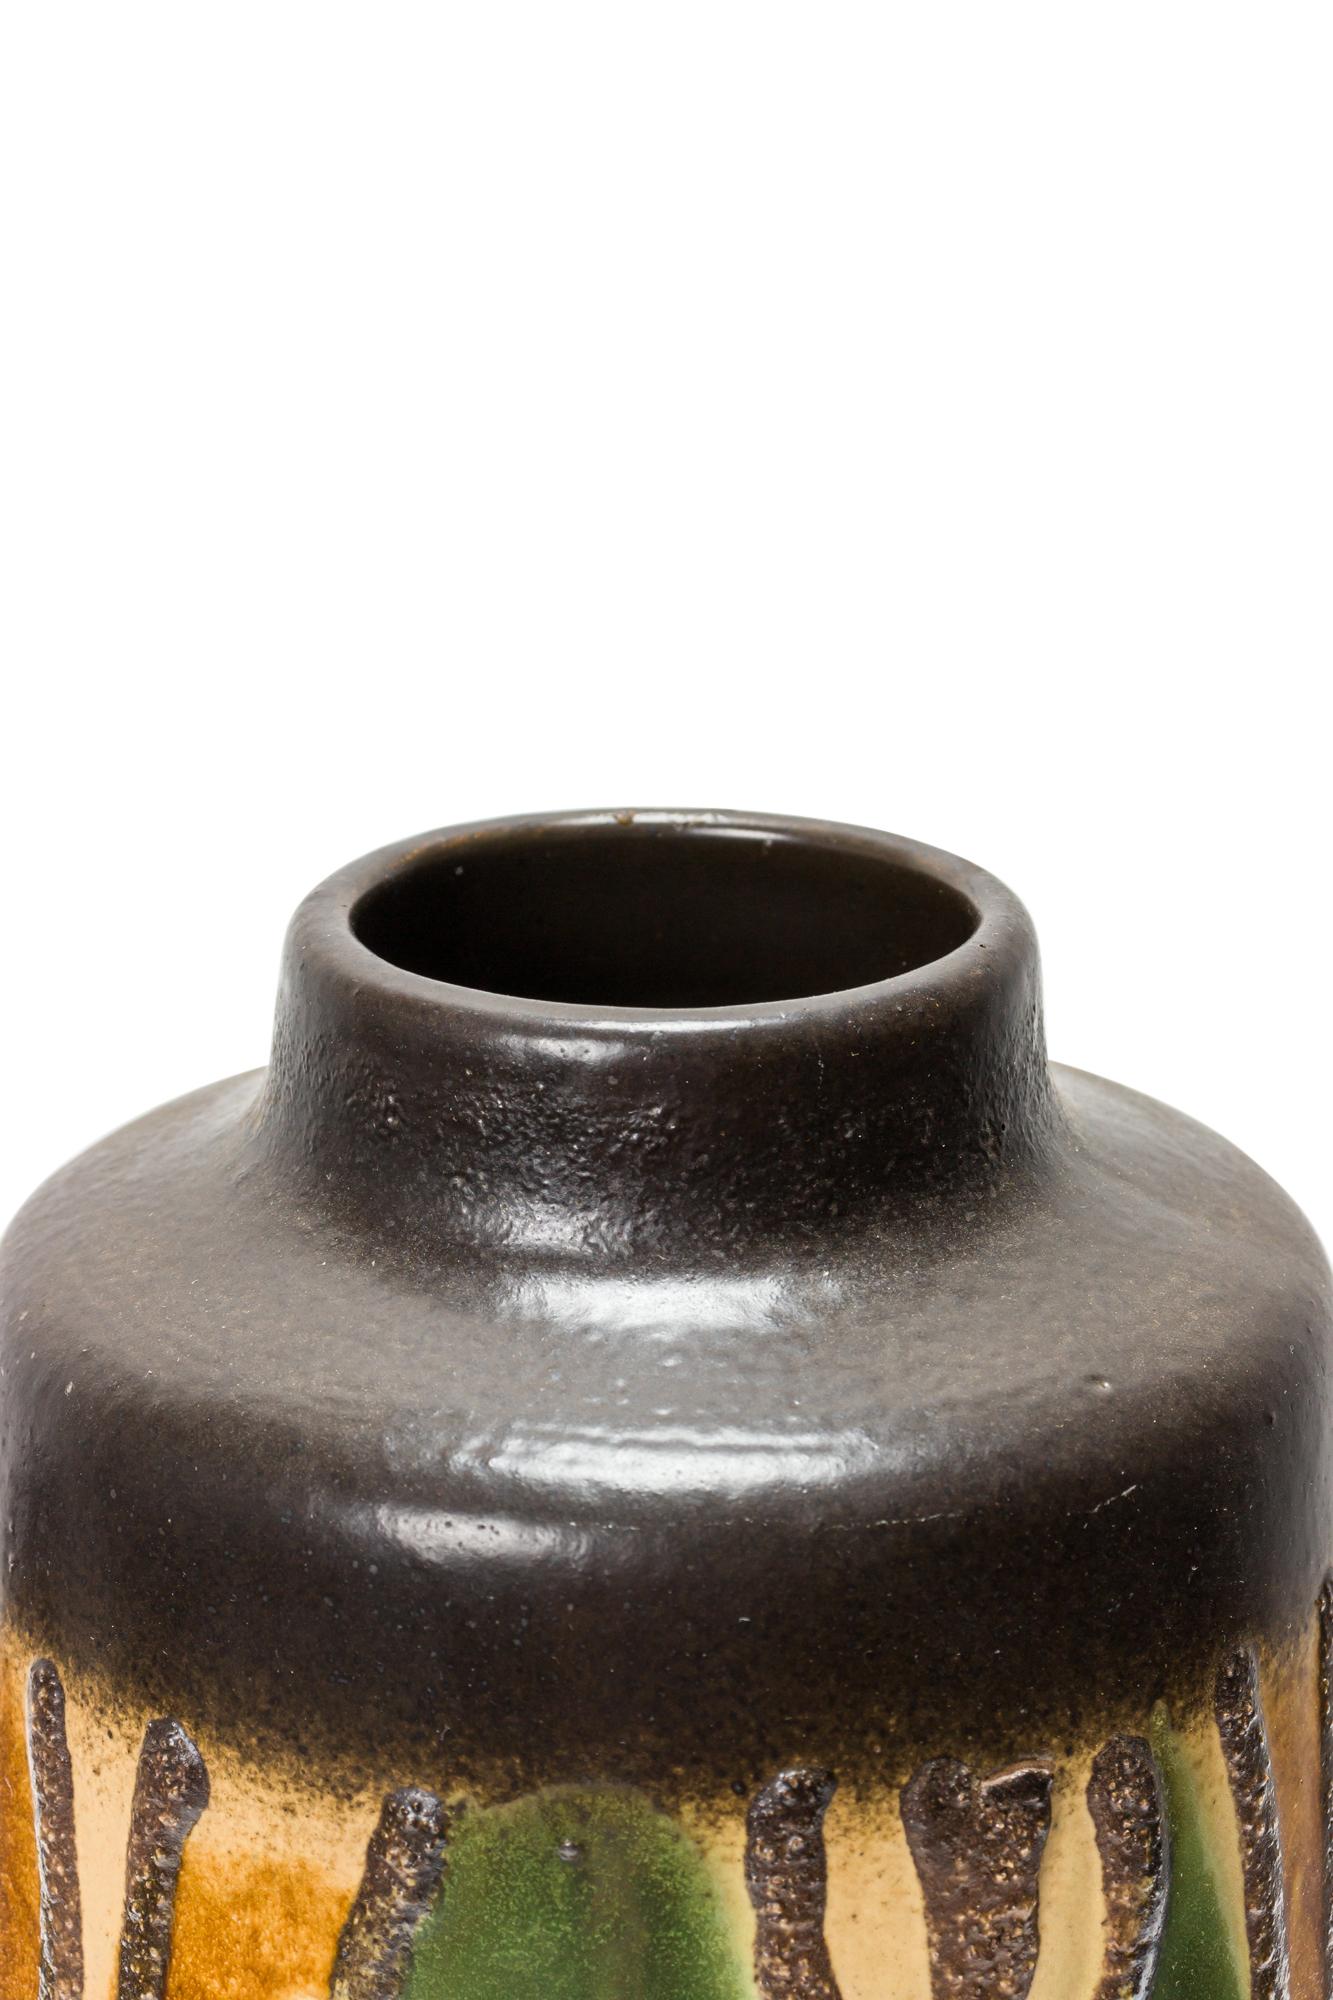 German Mid-Century cylindrical-form ceramic vase with a brown, green, and beige organic wavy shape patter around the body with a band of deep brown at the base and mouth. (VEB HALDENSLEBEN, numbered on the bottom, 3045A).